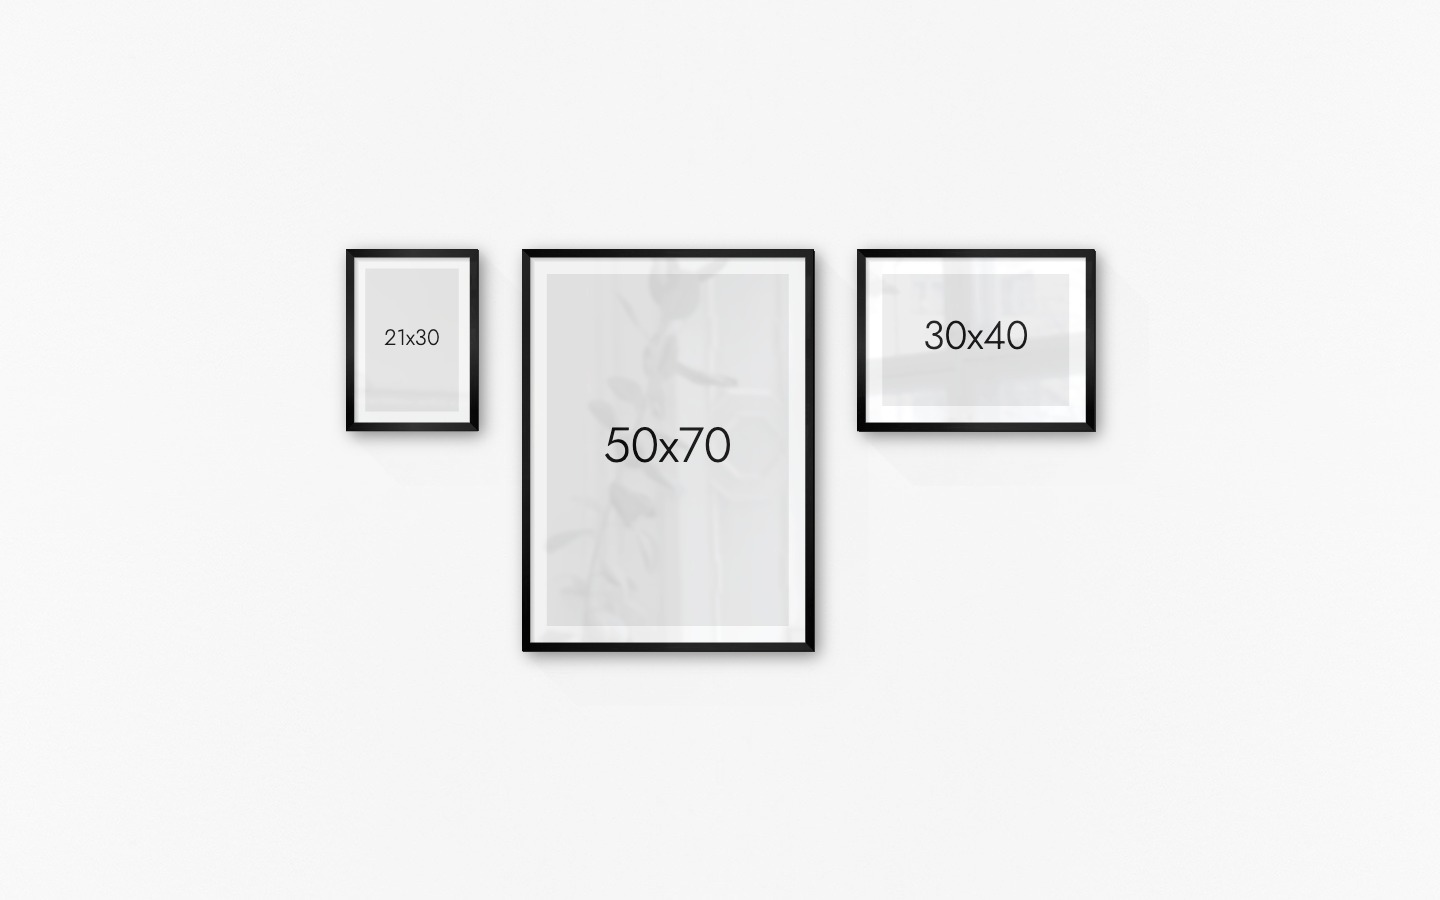 Gallery wall with picture frames in black in sizes 21x30, 50x70 and 30x40